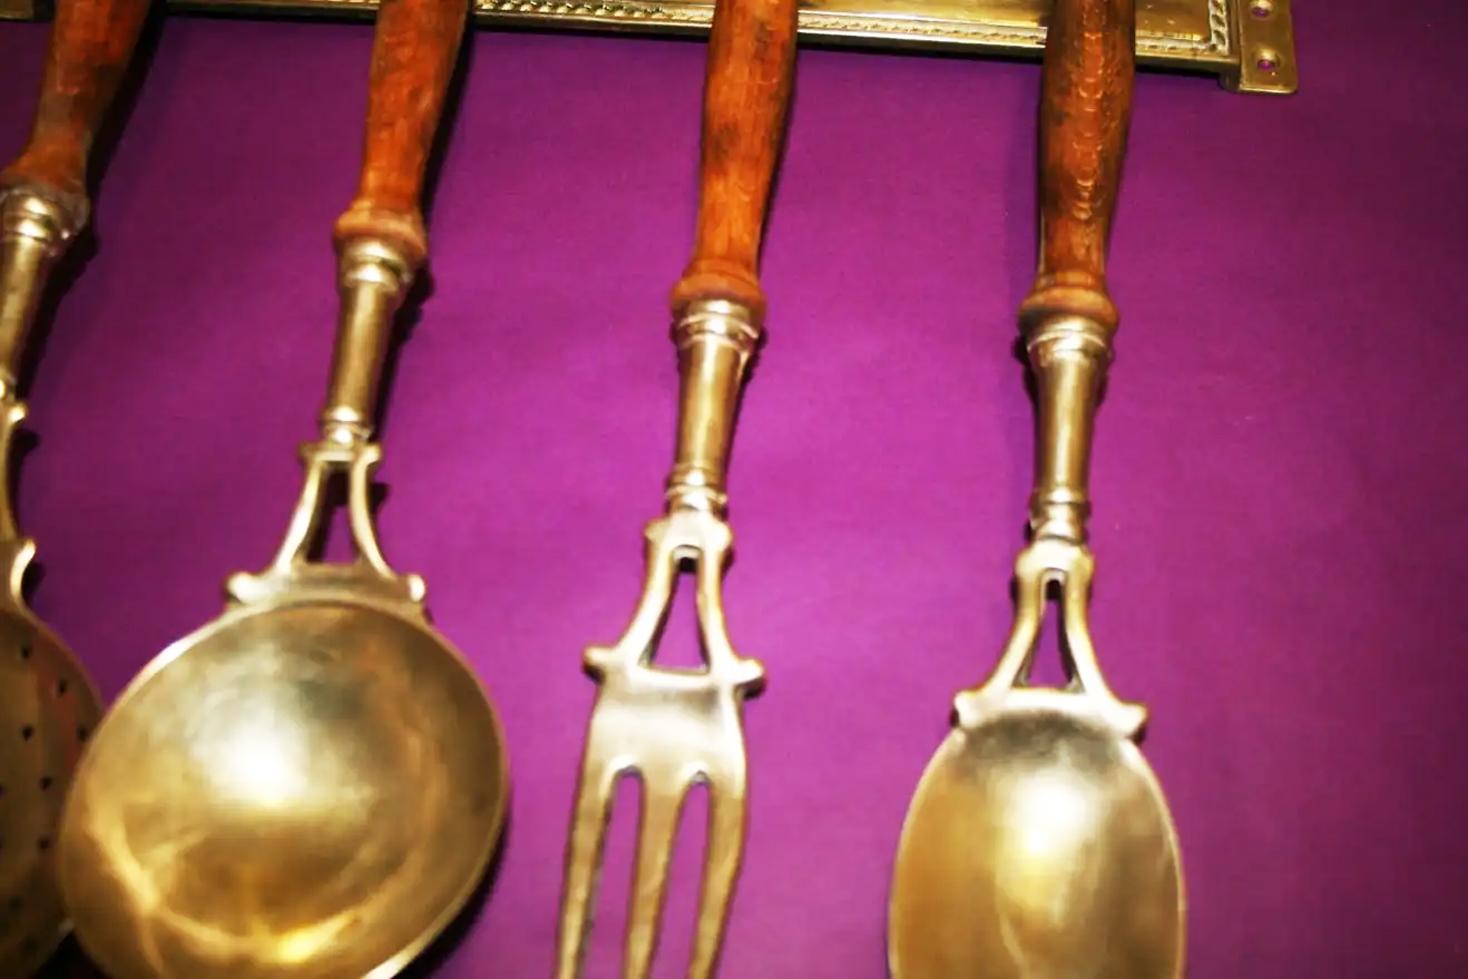 Old kitchen tools or utensils made of wood and brass hanging from a hanging bar. Old kitchen appliance  Midcentury  or Early

Saucepan fork palette and serving pot

This set of brass utensils is ideal to decorate a kitchen of any style, because its